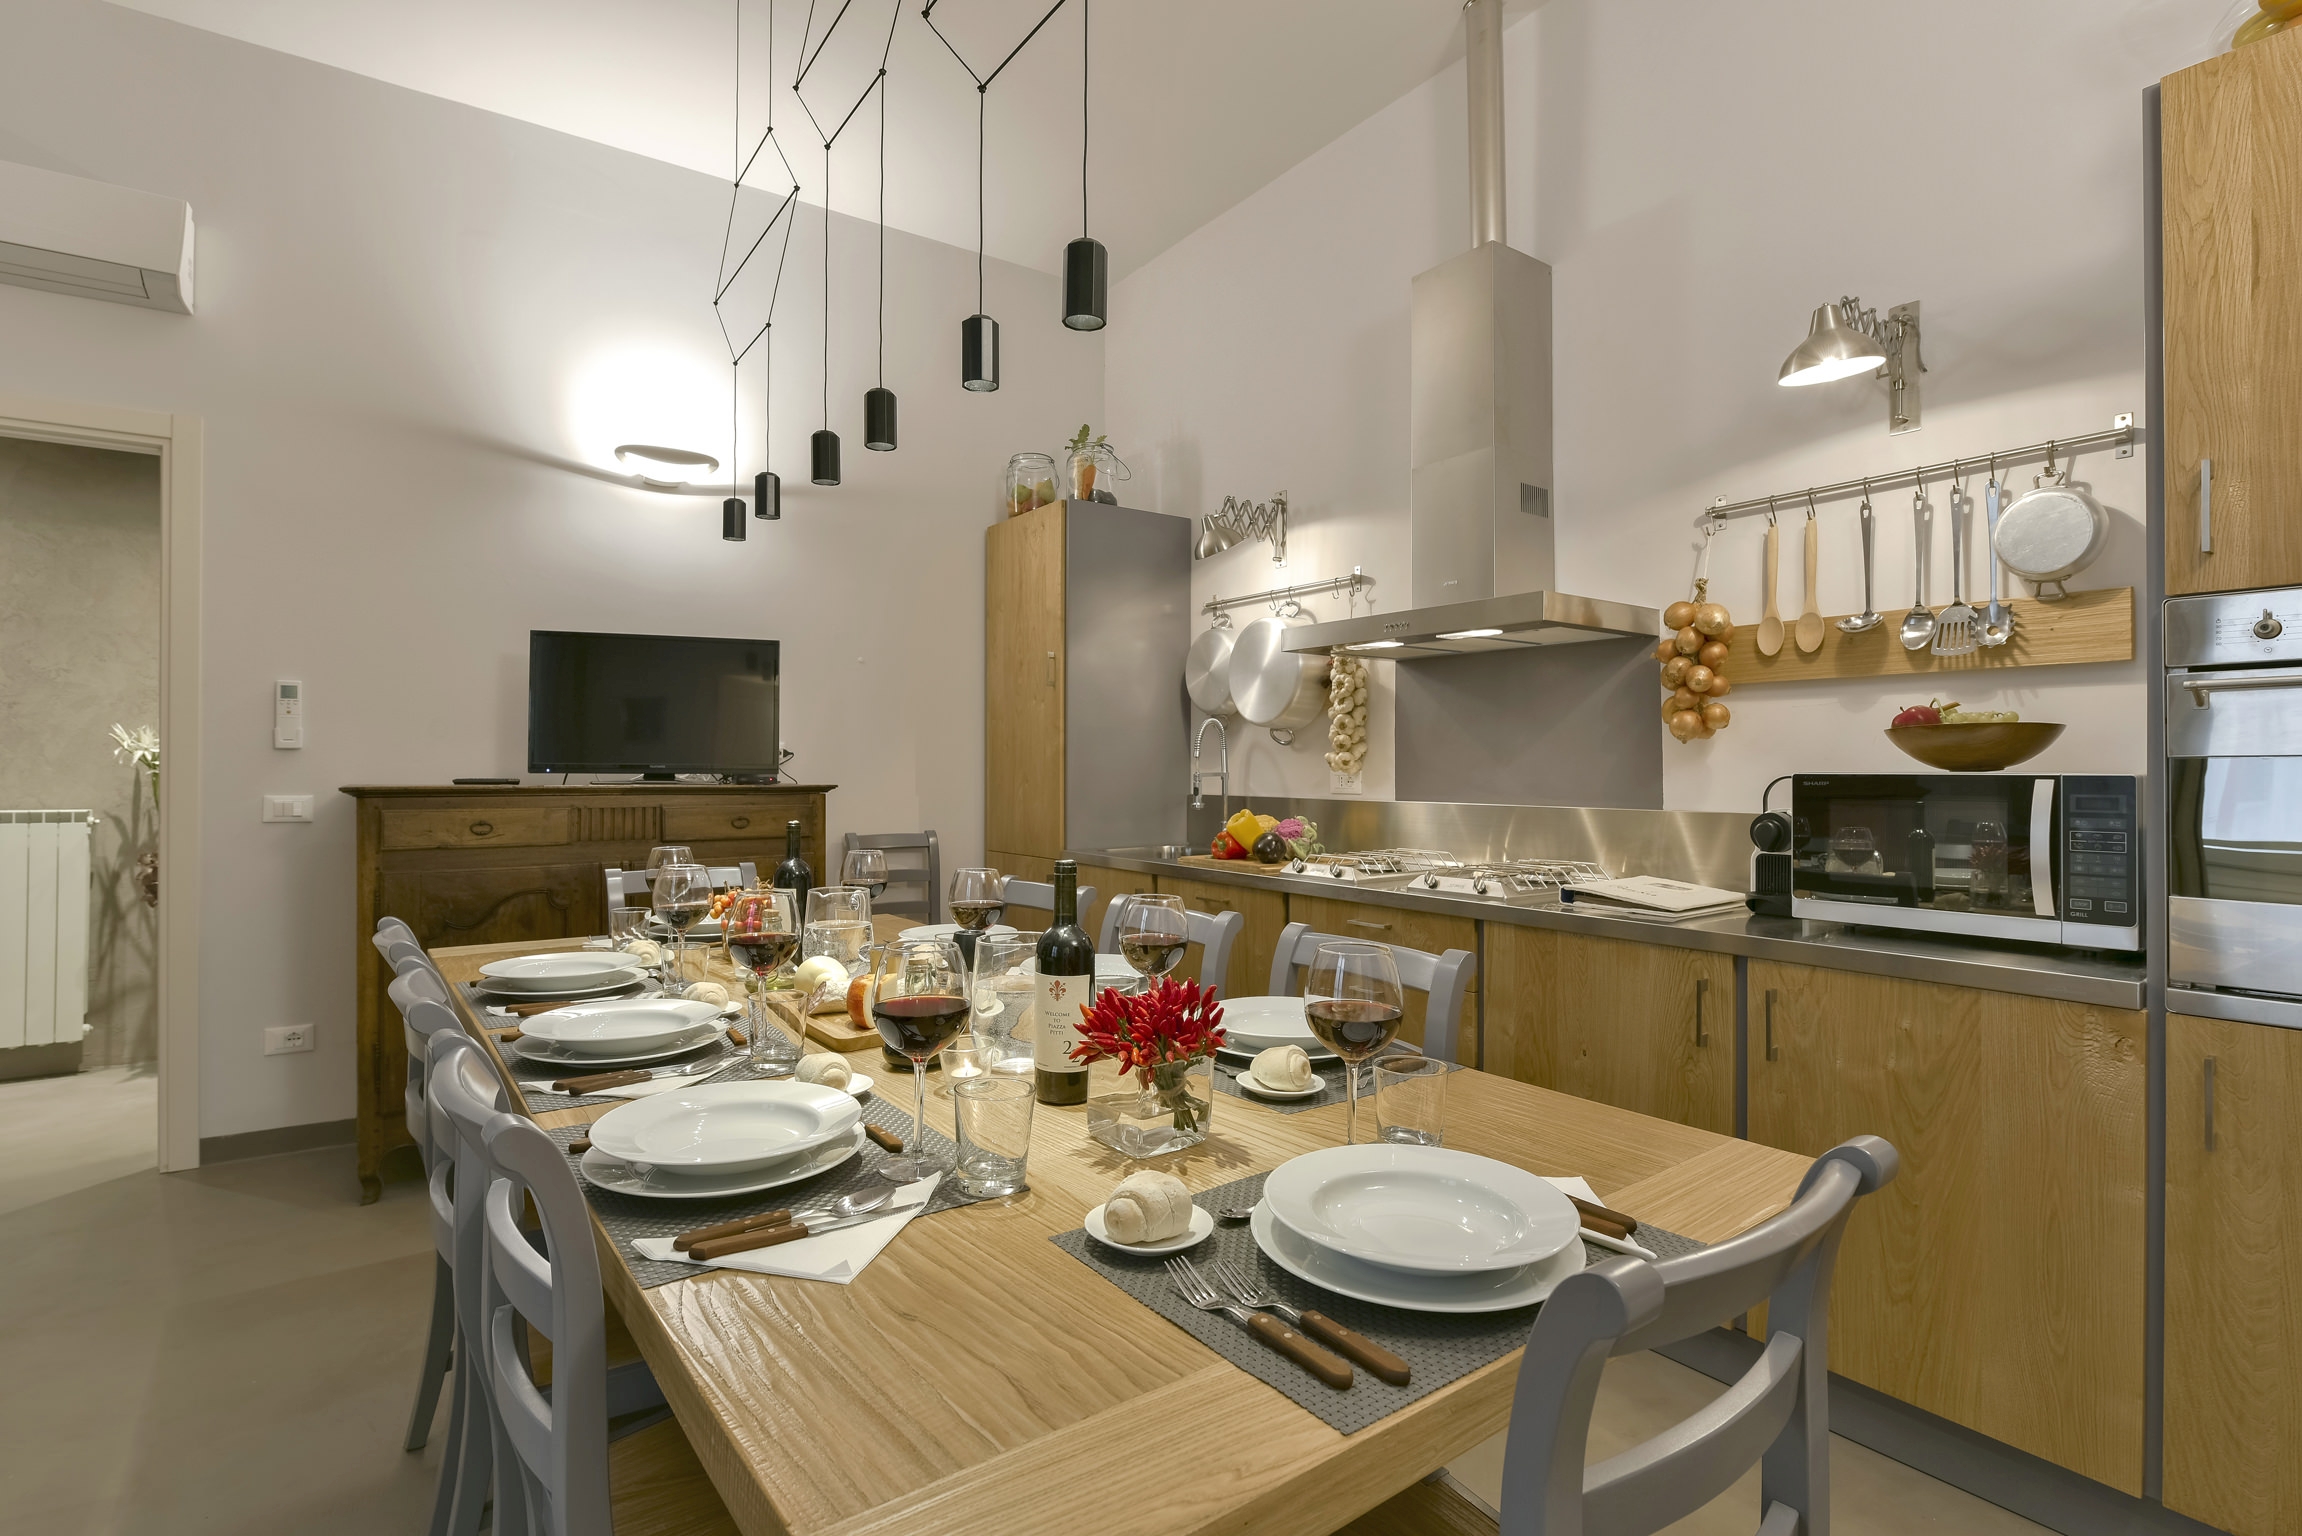 Kitchen with dining table at Residenza dei Pitti, Tuscany